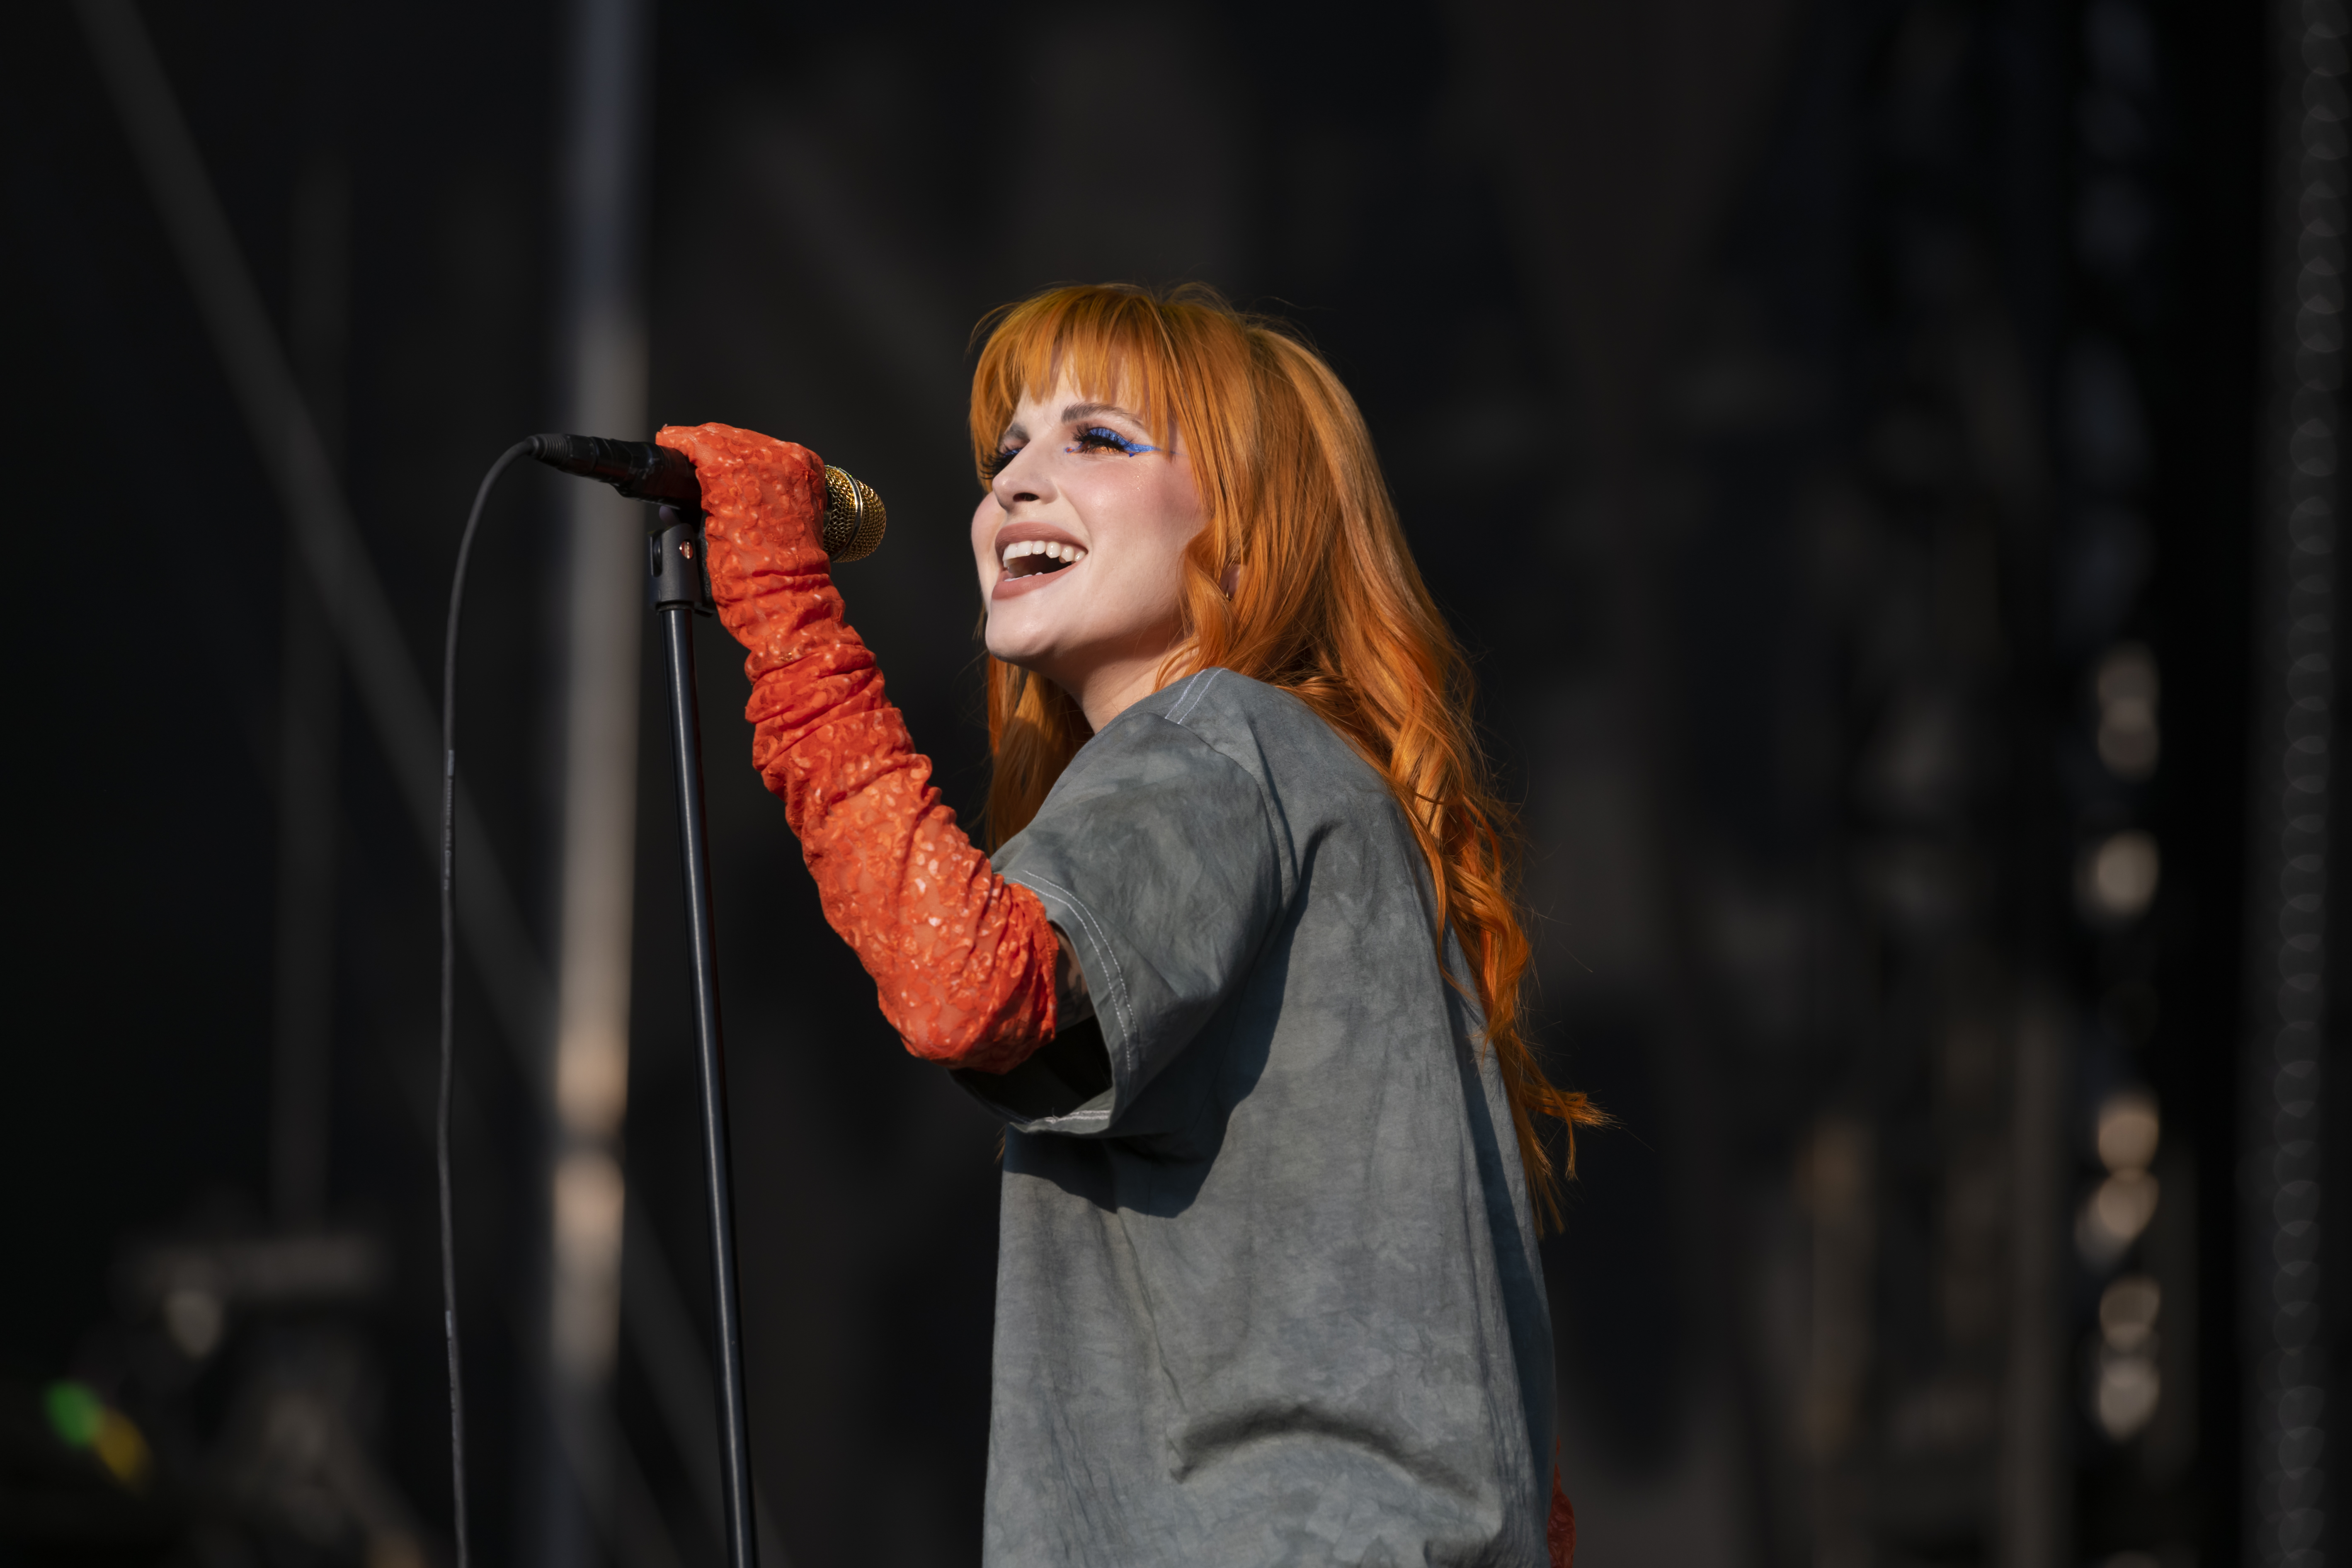 Paramore's Hayley Williams Dating History, Relationships